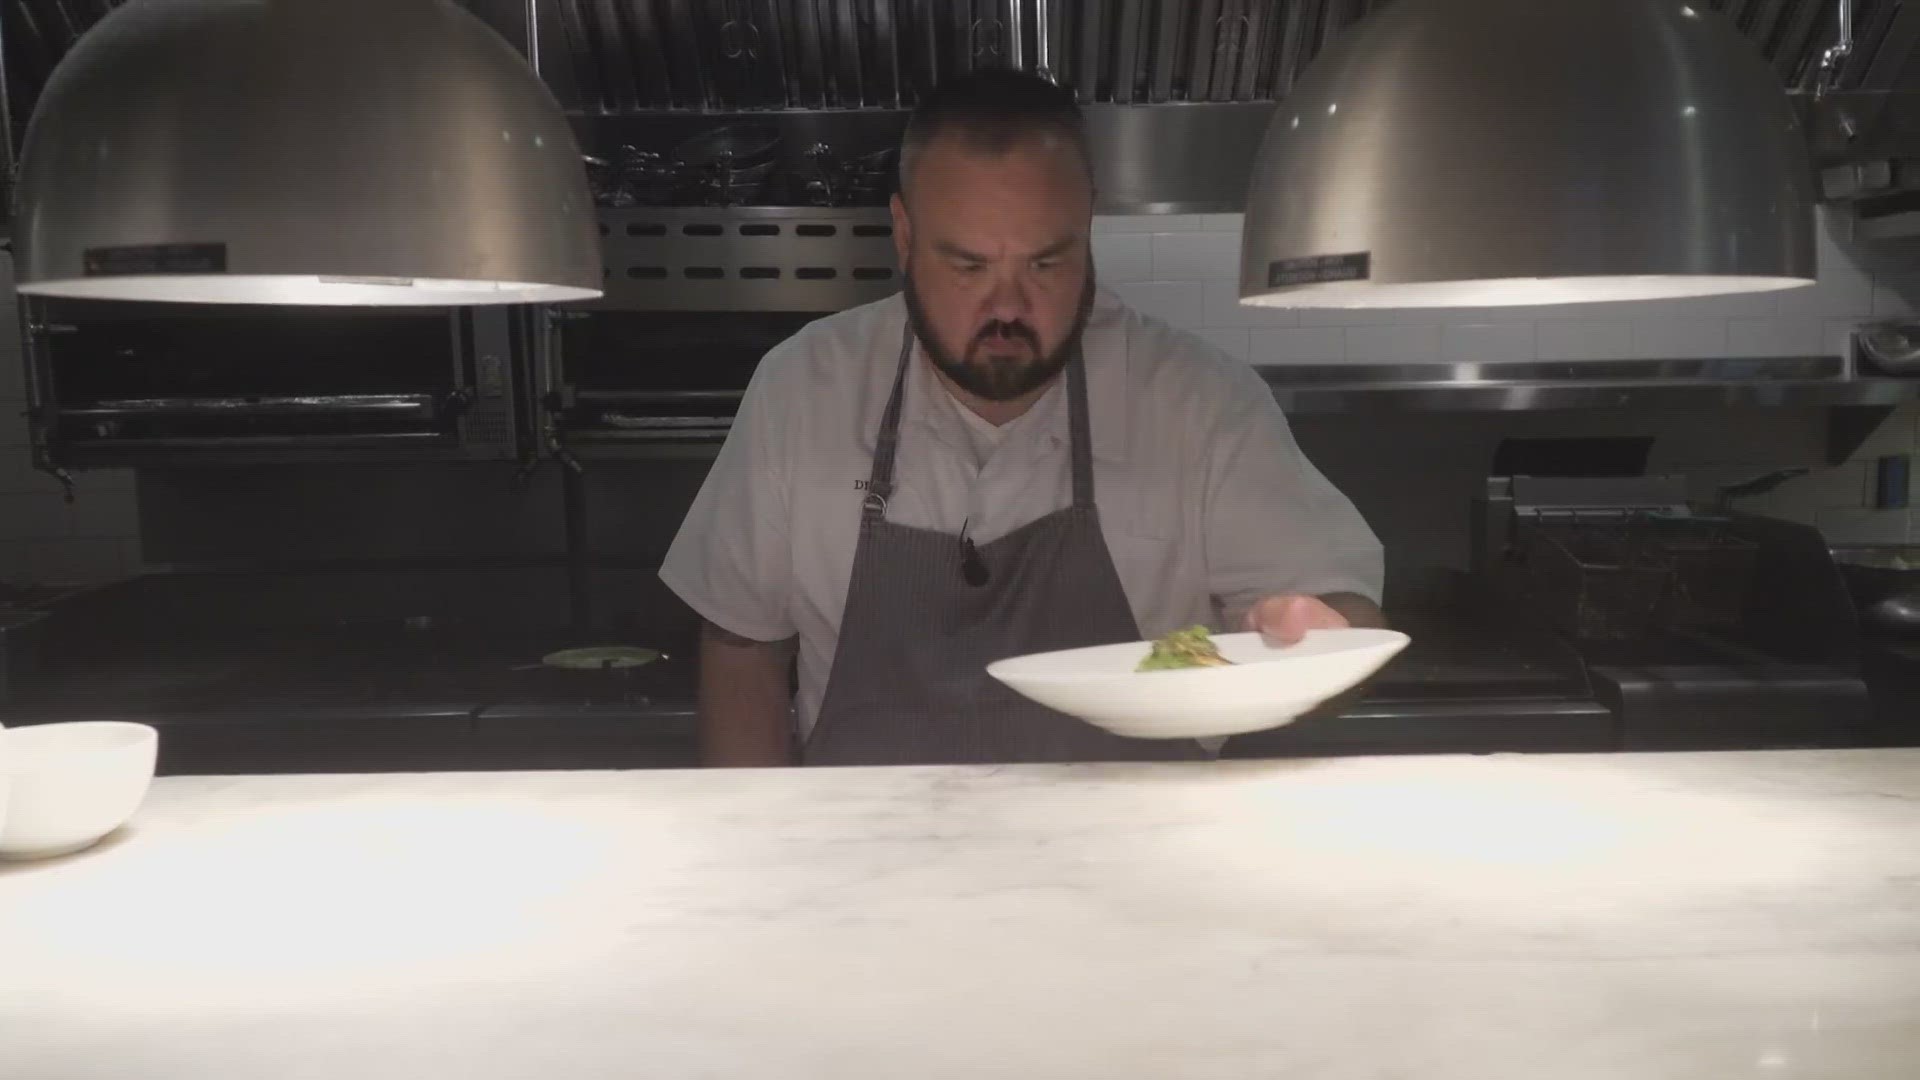 Totally surreal': Sacramento chef appears on Food Network show